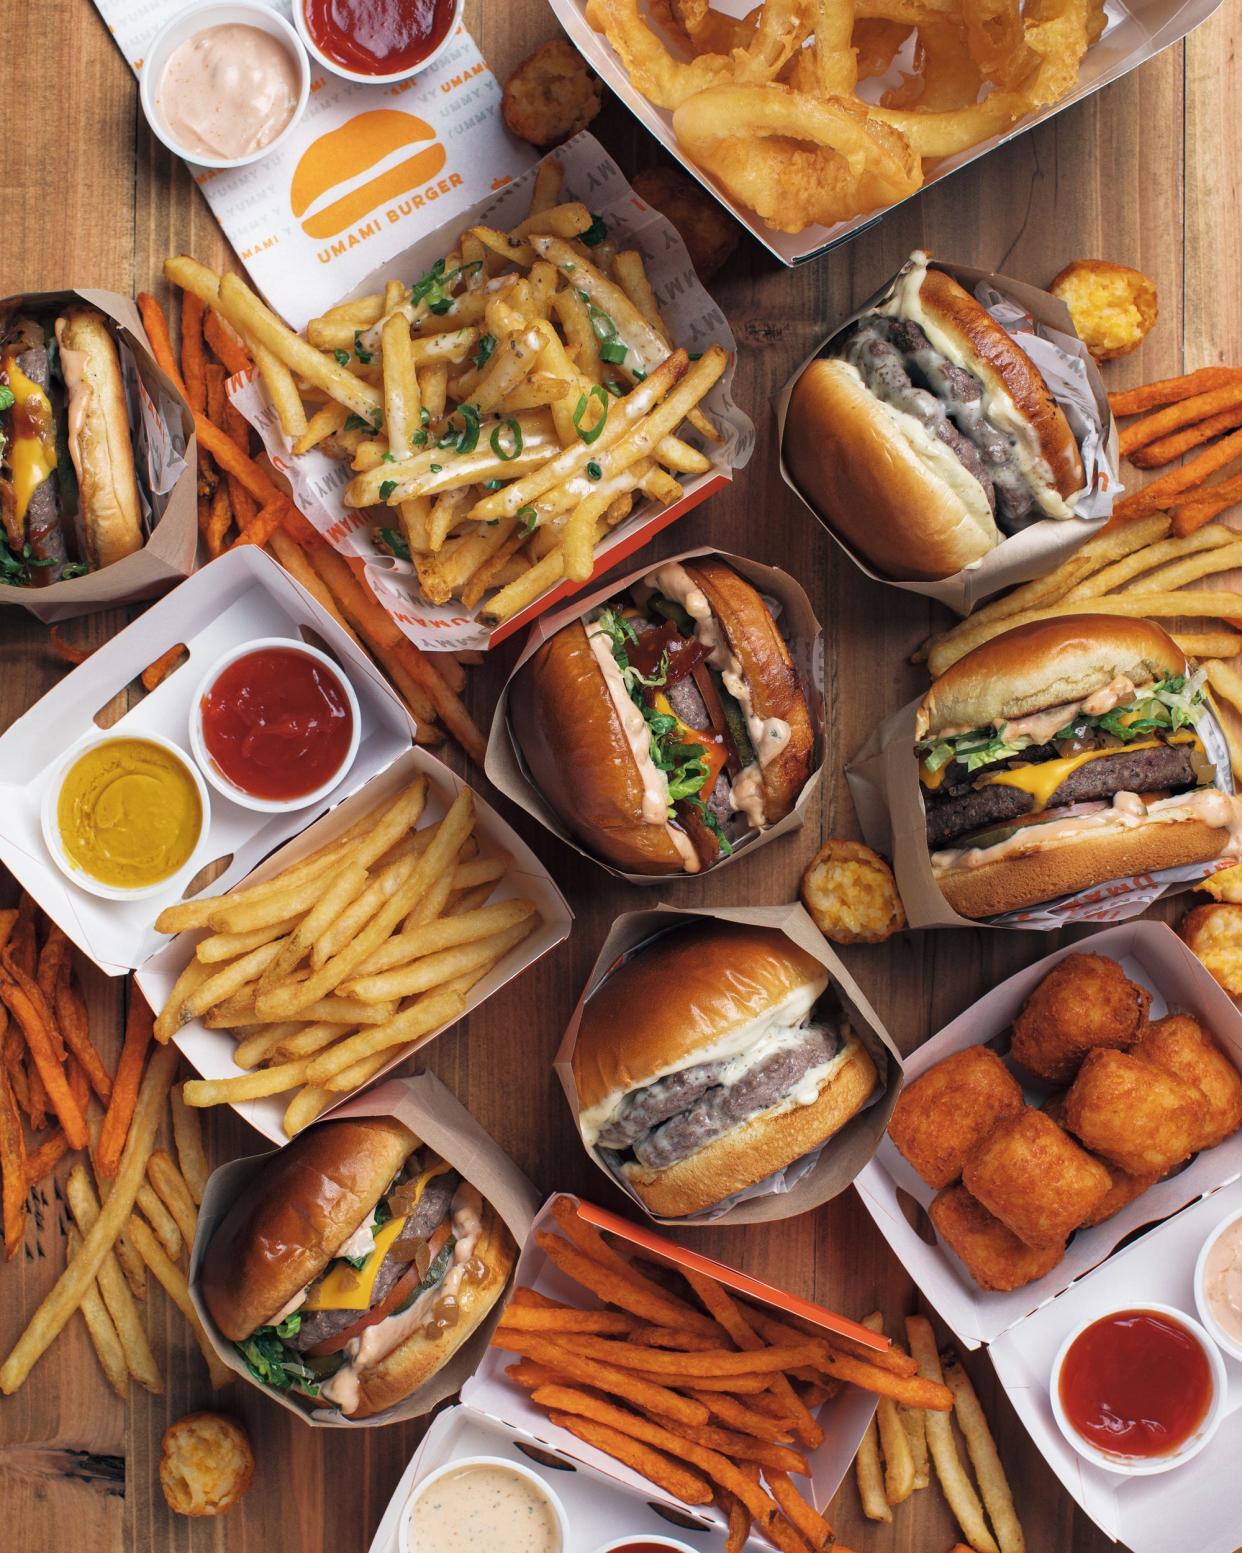 The new GO by Citizens app from nationwide restaurant operator C3 allows customers to combine menu items from many different restaurants, including chains like Umami Burger, in a single home delivery order.